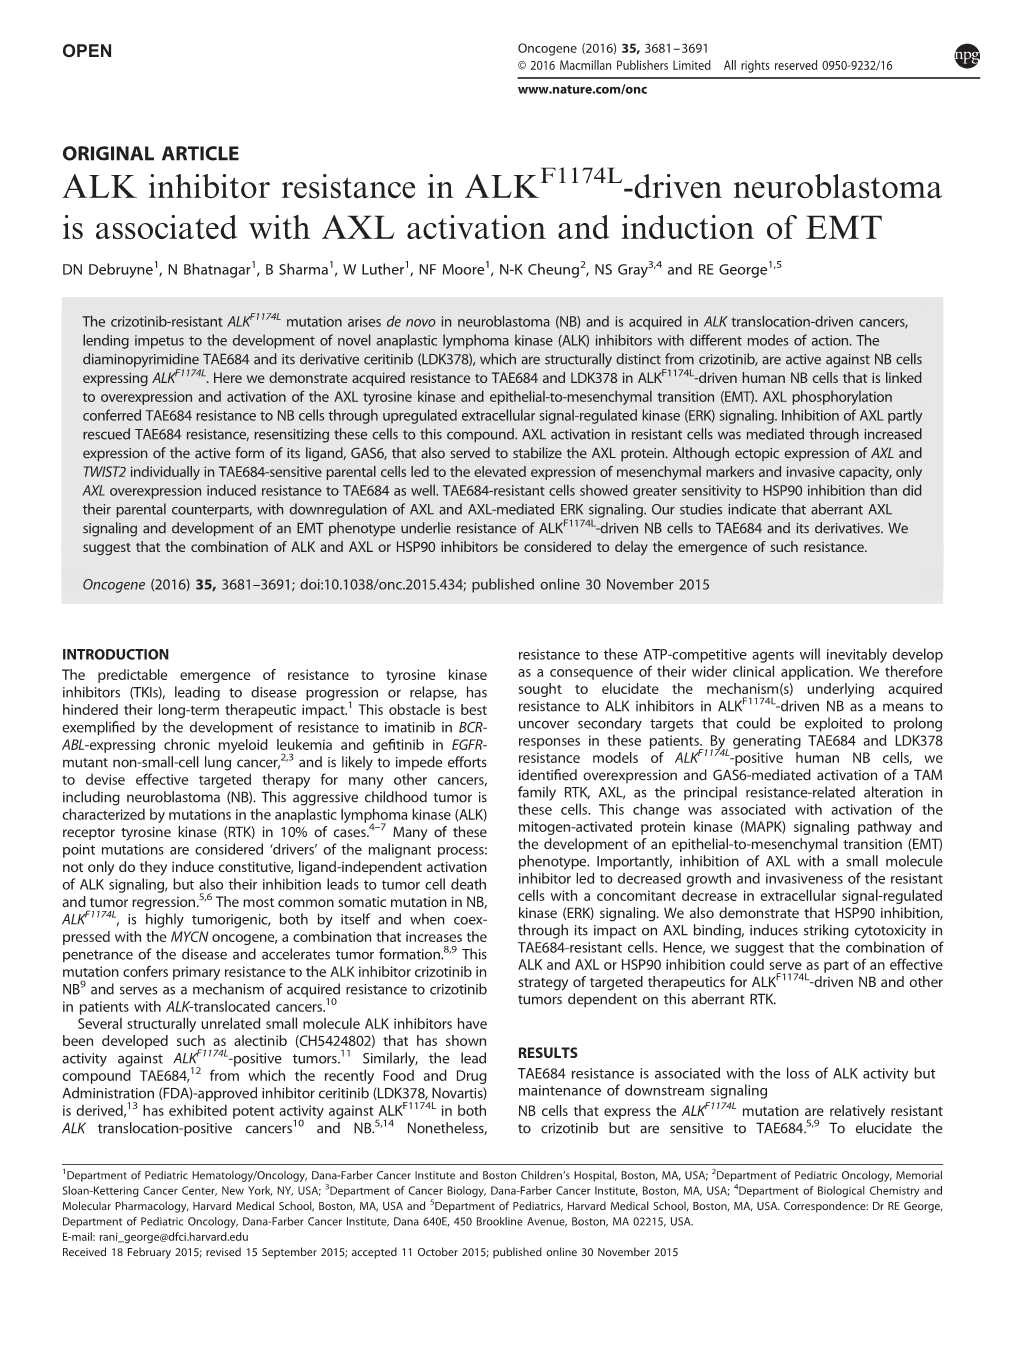 ALK Inhibitor Resistance in ALKF1174L-Driven Neuroblastoma Is Associated with AXL Activation and Induction of EMT